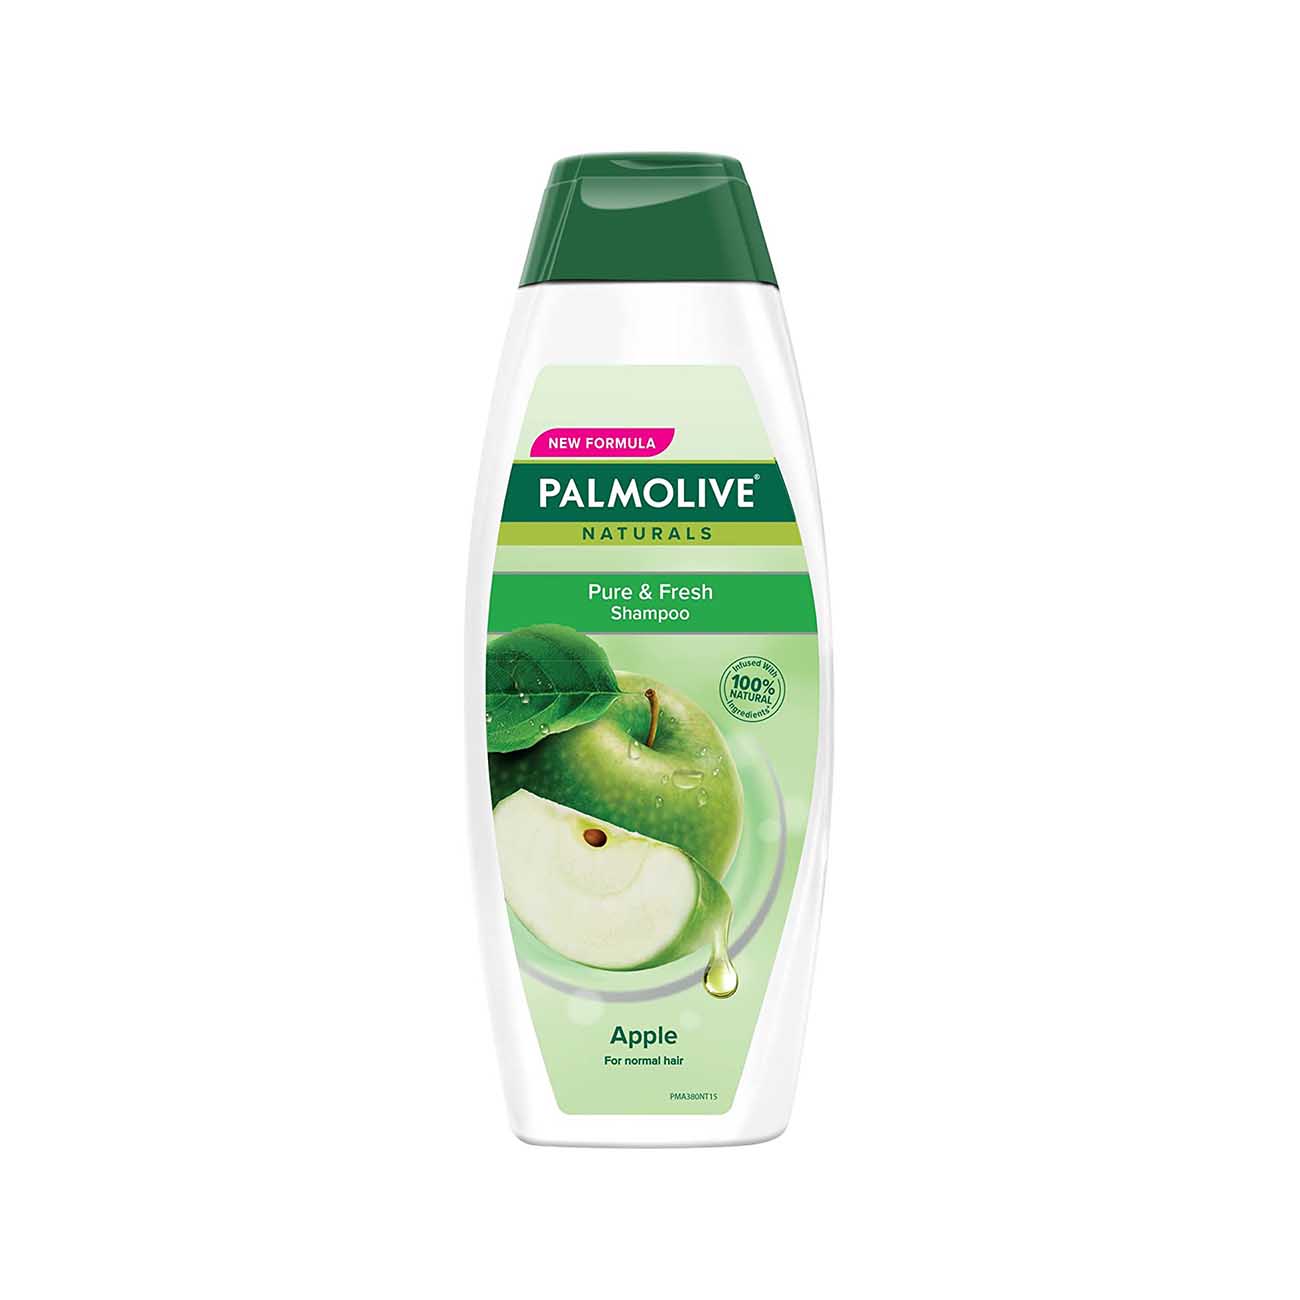 Palmolive Pure and Fresh Shampoo for Normal Hair, 100% Natural Ingredients, Apple Shampoo, 380 ml